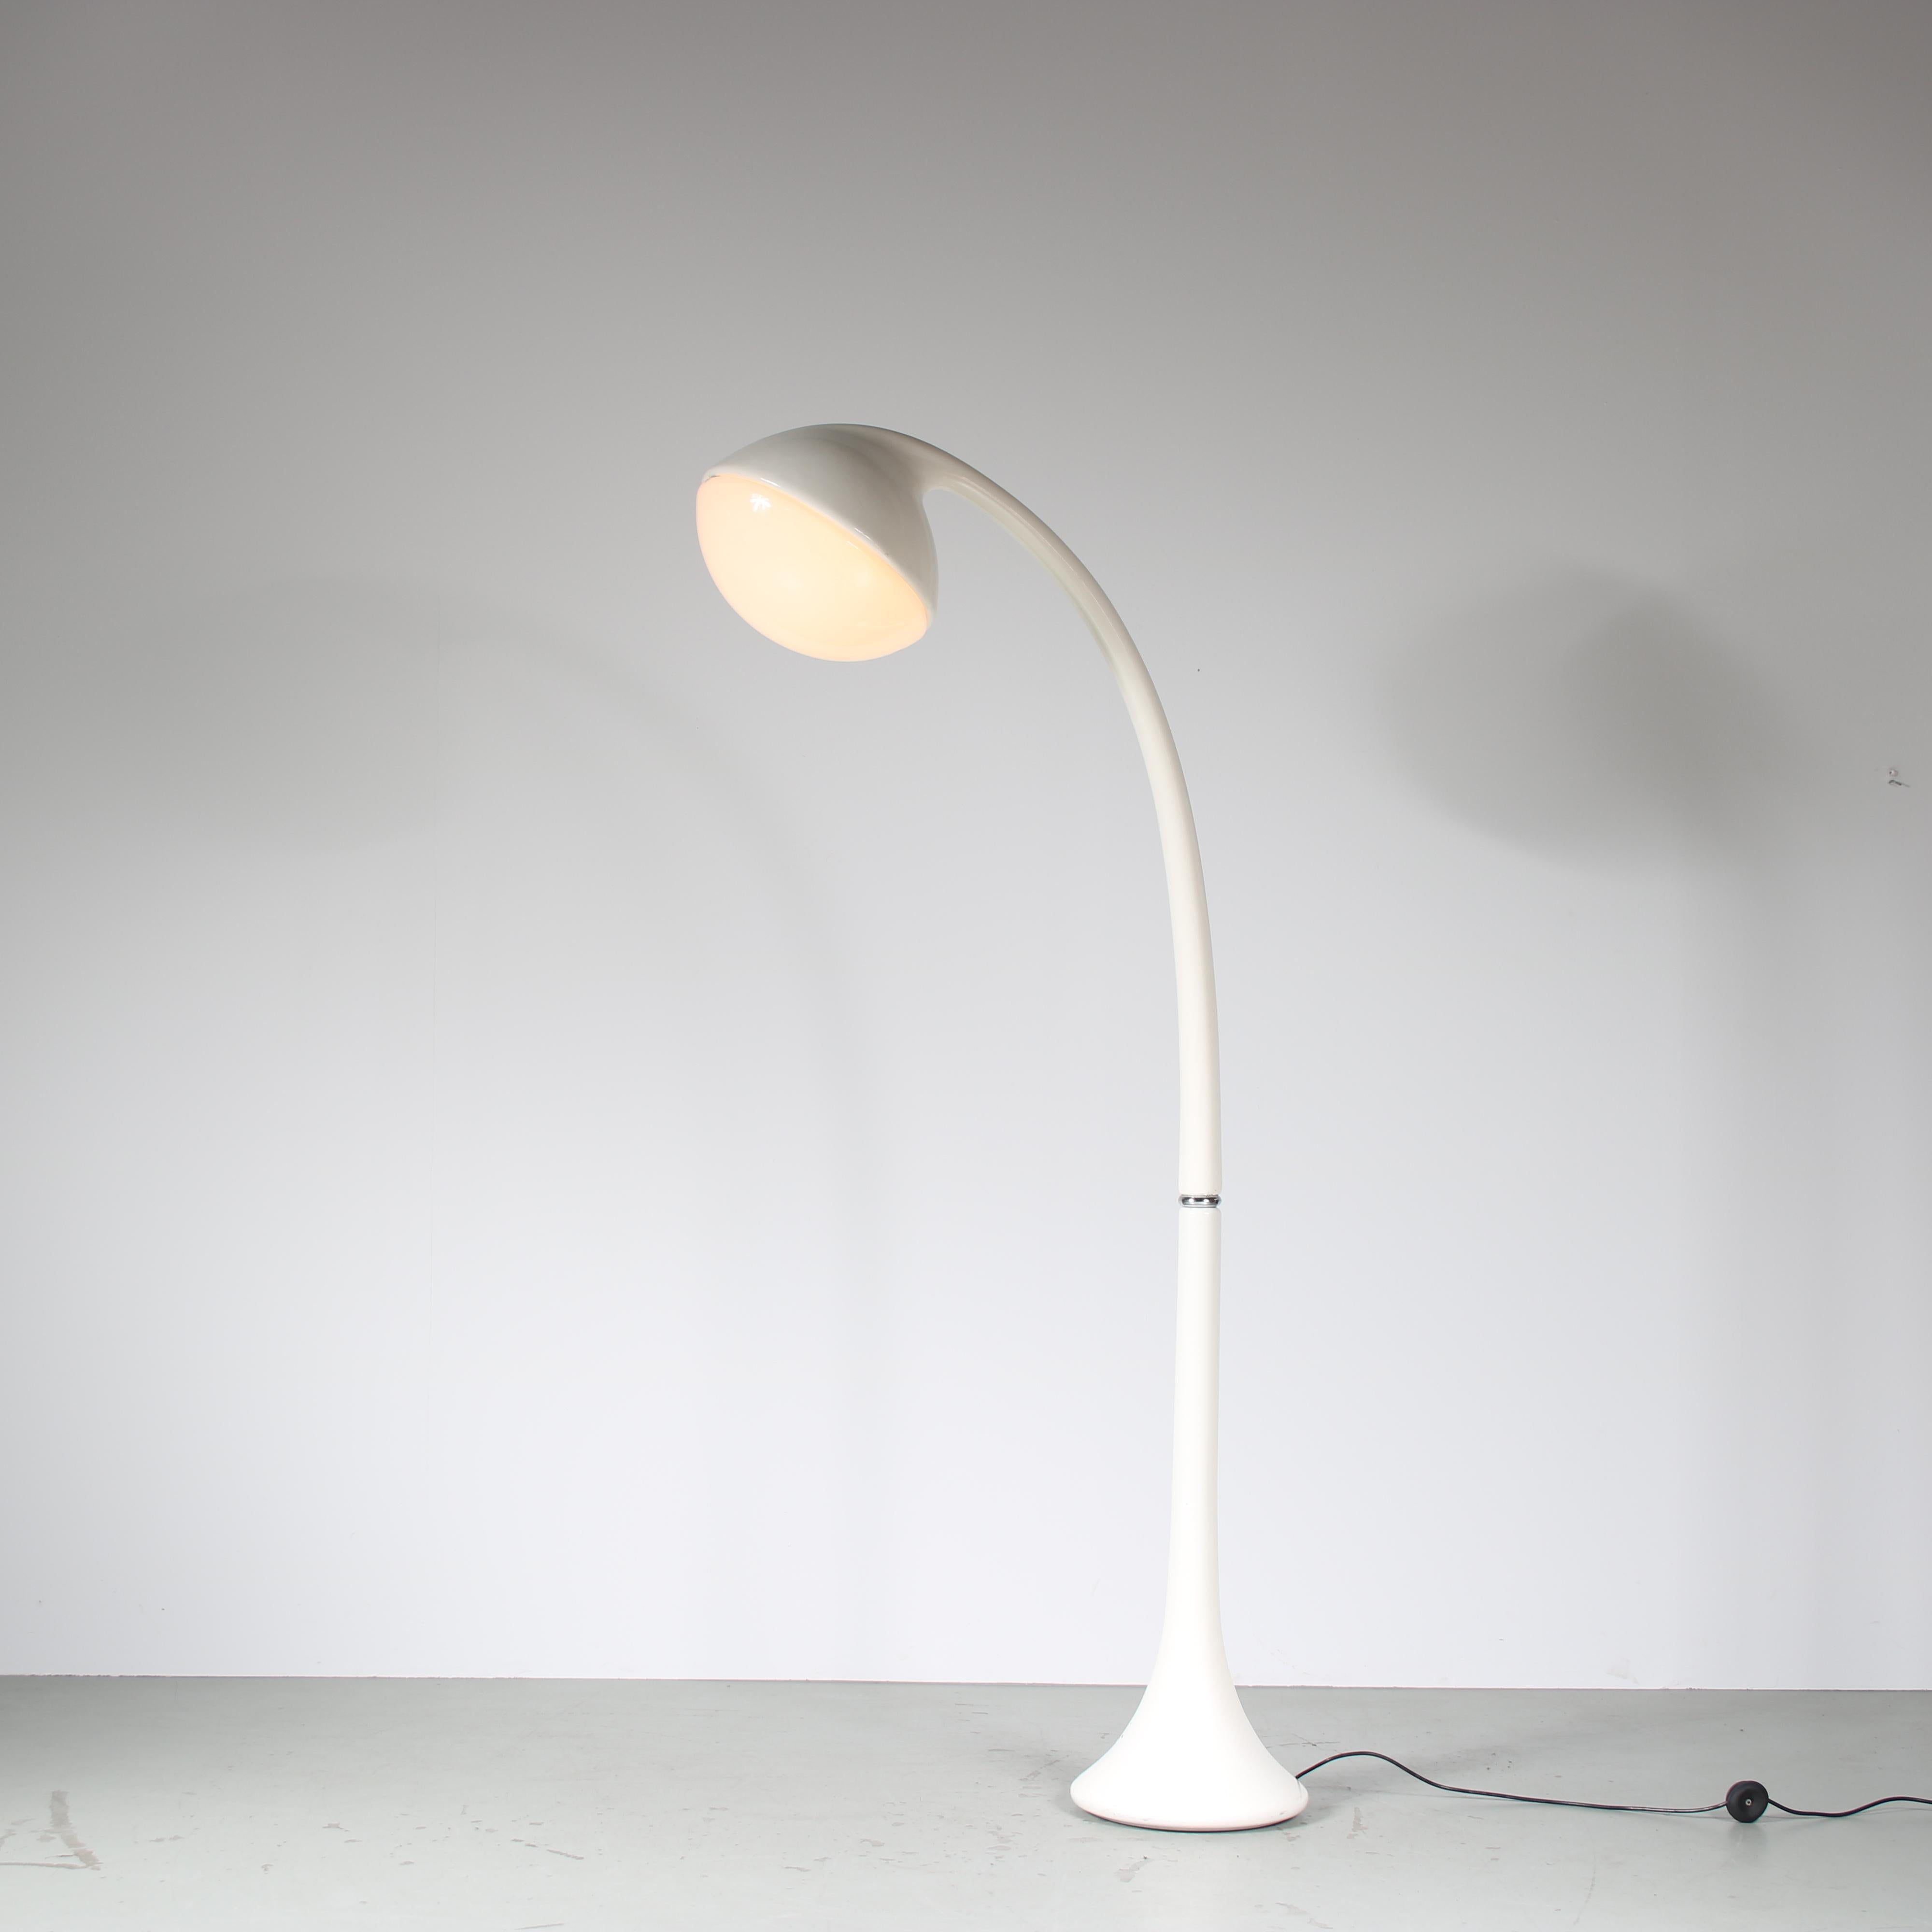 A very rare floor lamp, model “Lampione”, designed by Fabio Lenci and manufactured by iGuzzini in Italy around 1970.

This wonderful large lamp is an iconic and much sought after find of mid-century design lighting! Made of plyurethane foam with